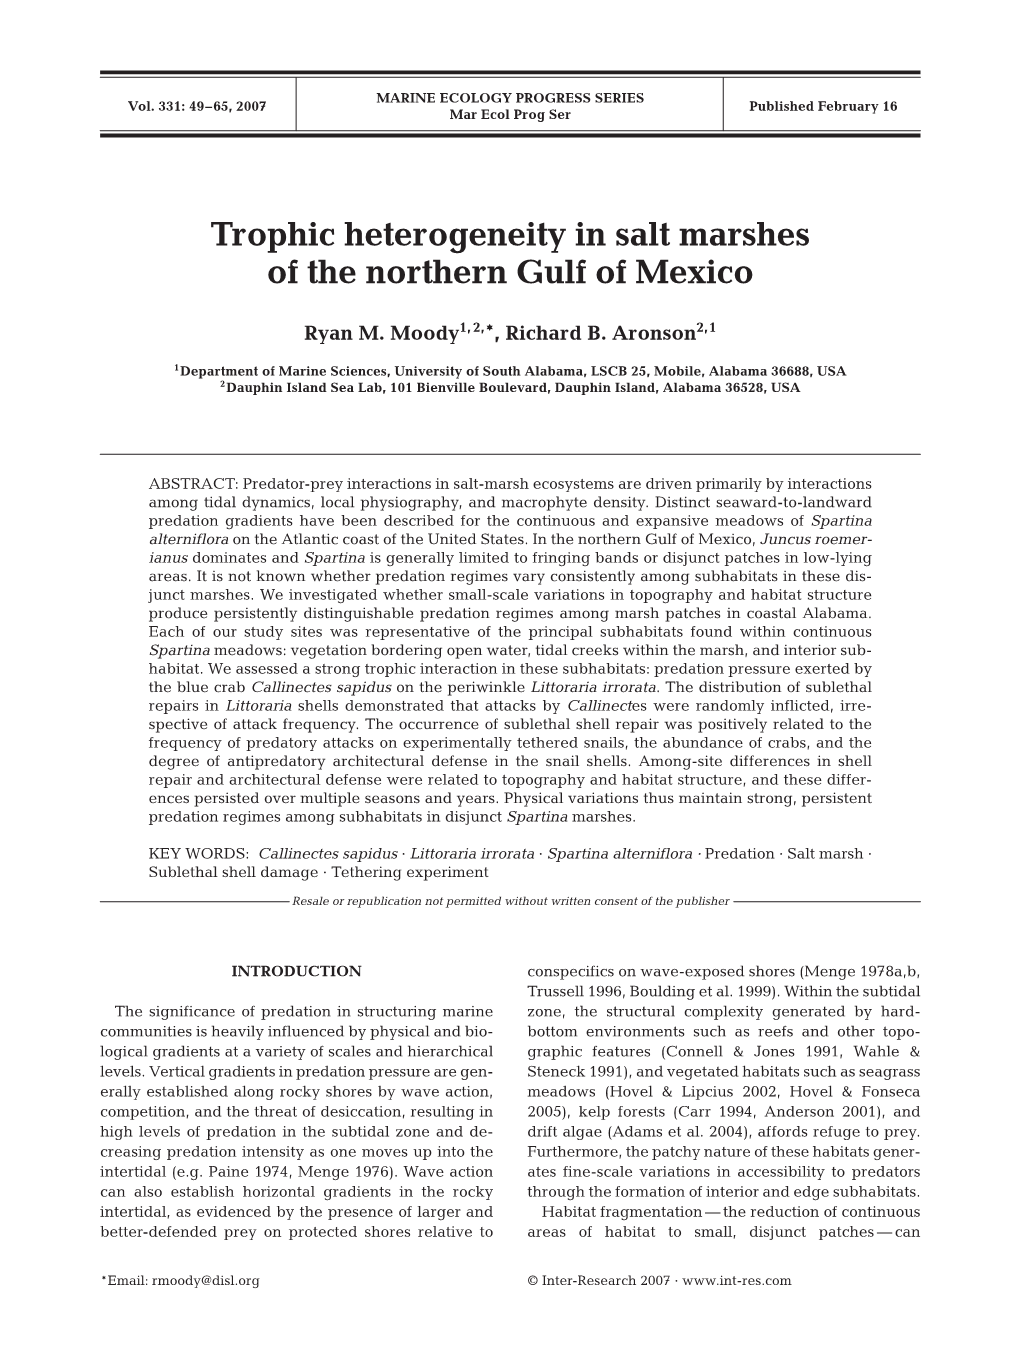 Trophic Heterogeneity in Salt Marshes of the Northern Gulf of Mexico